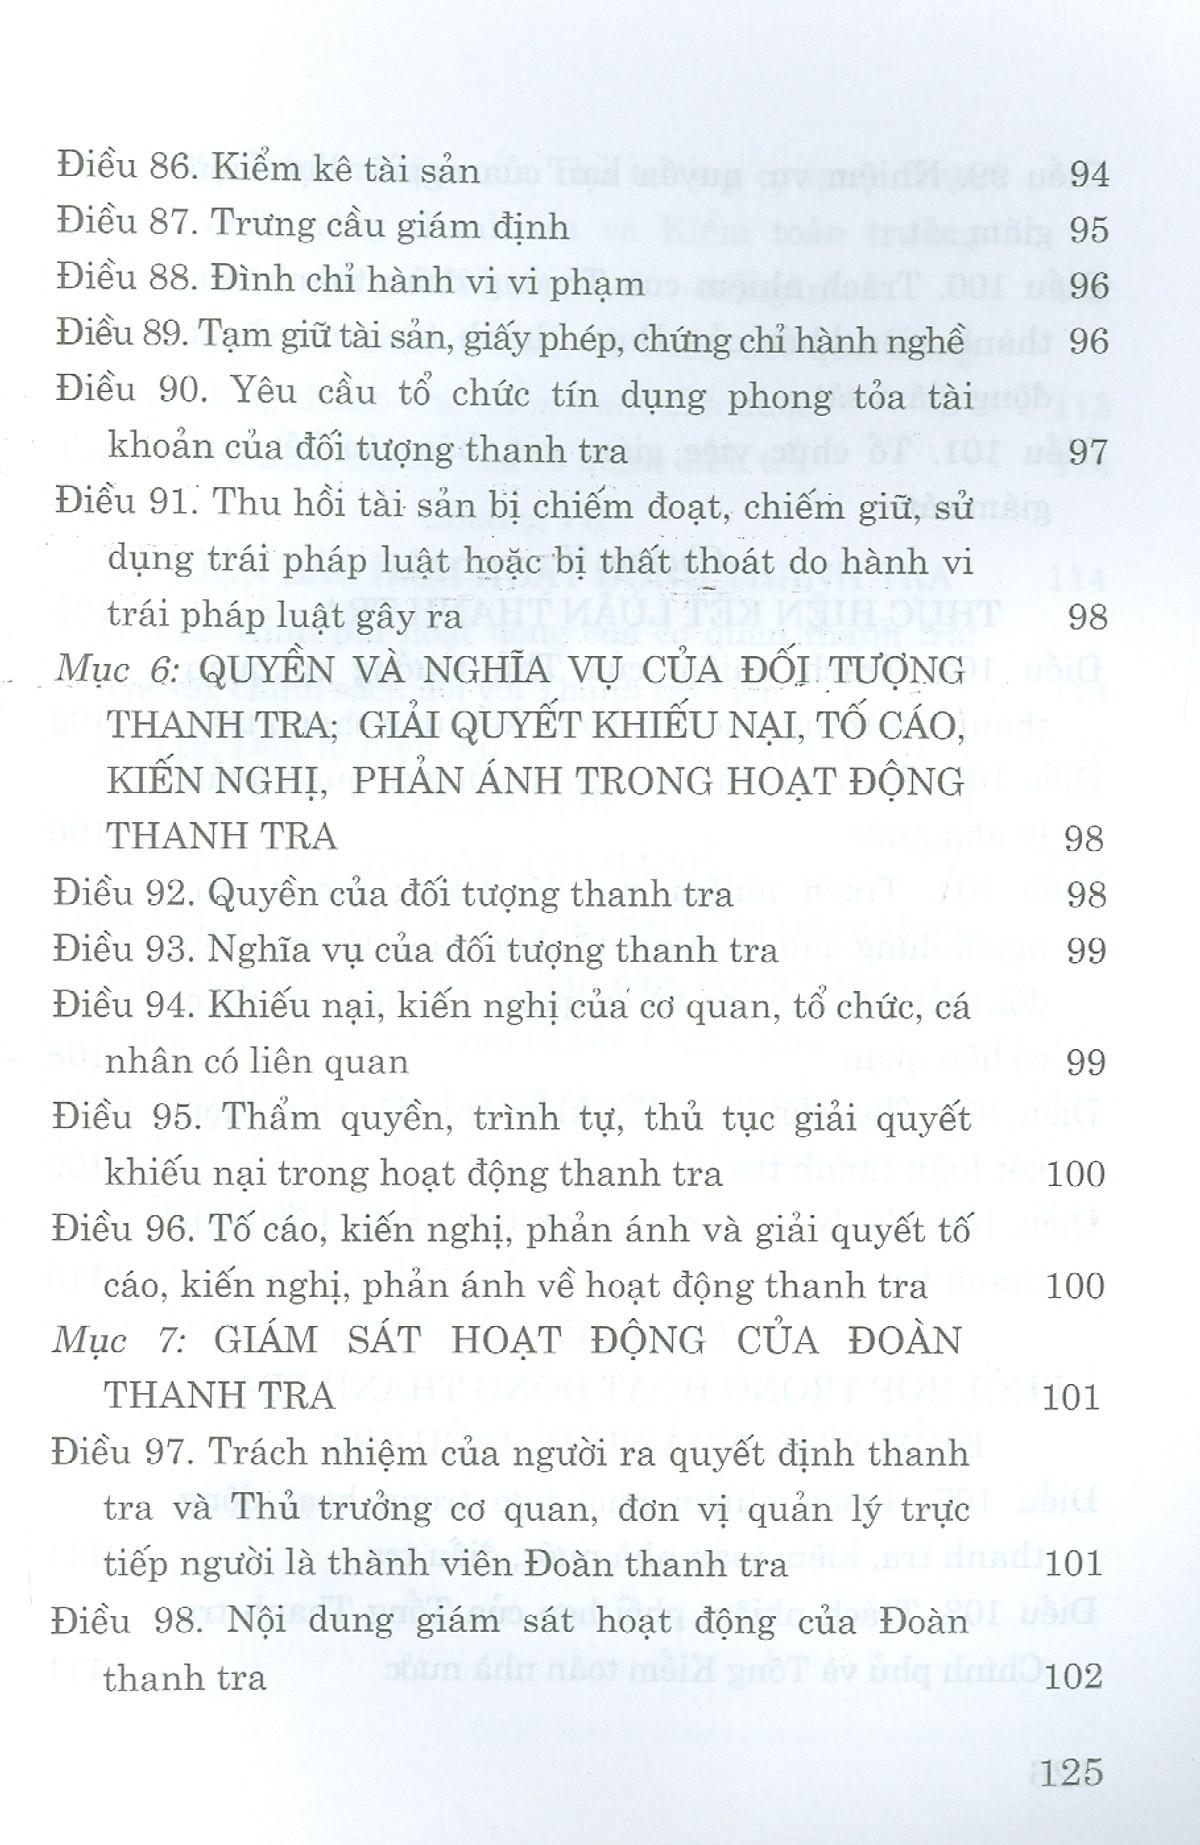 Luật Thanh Tra